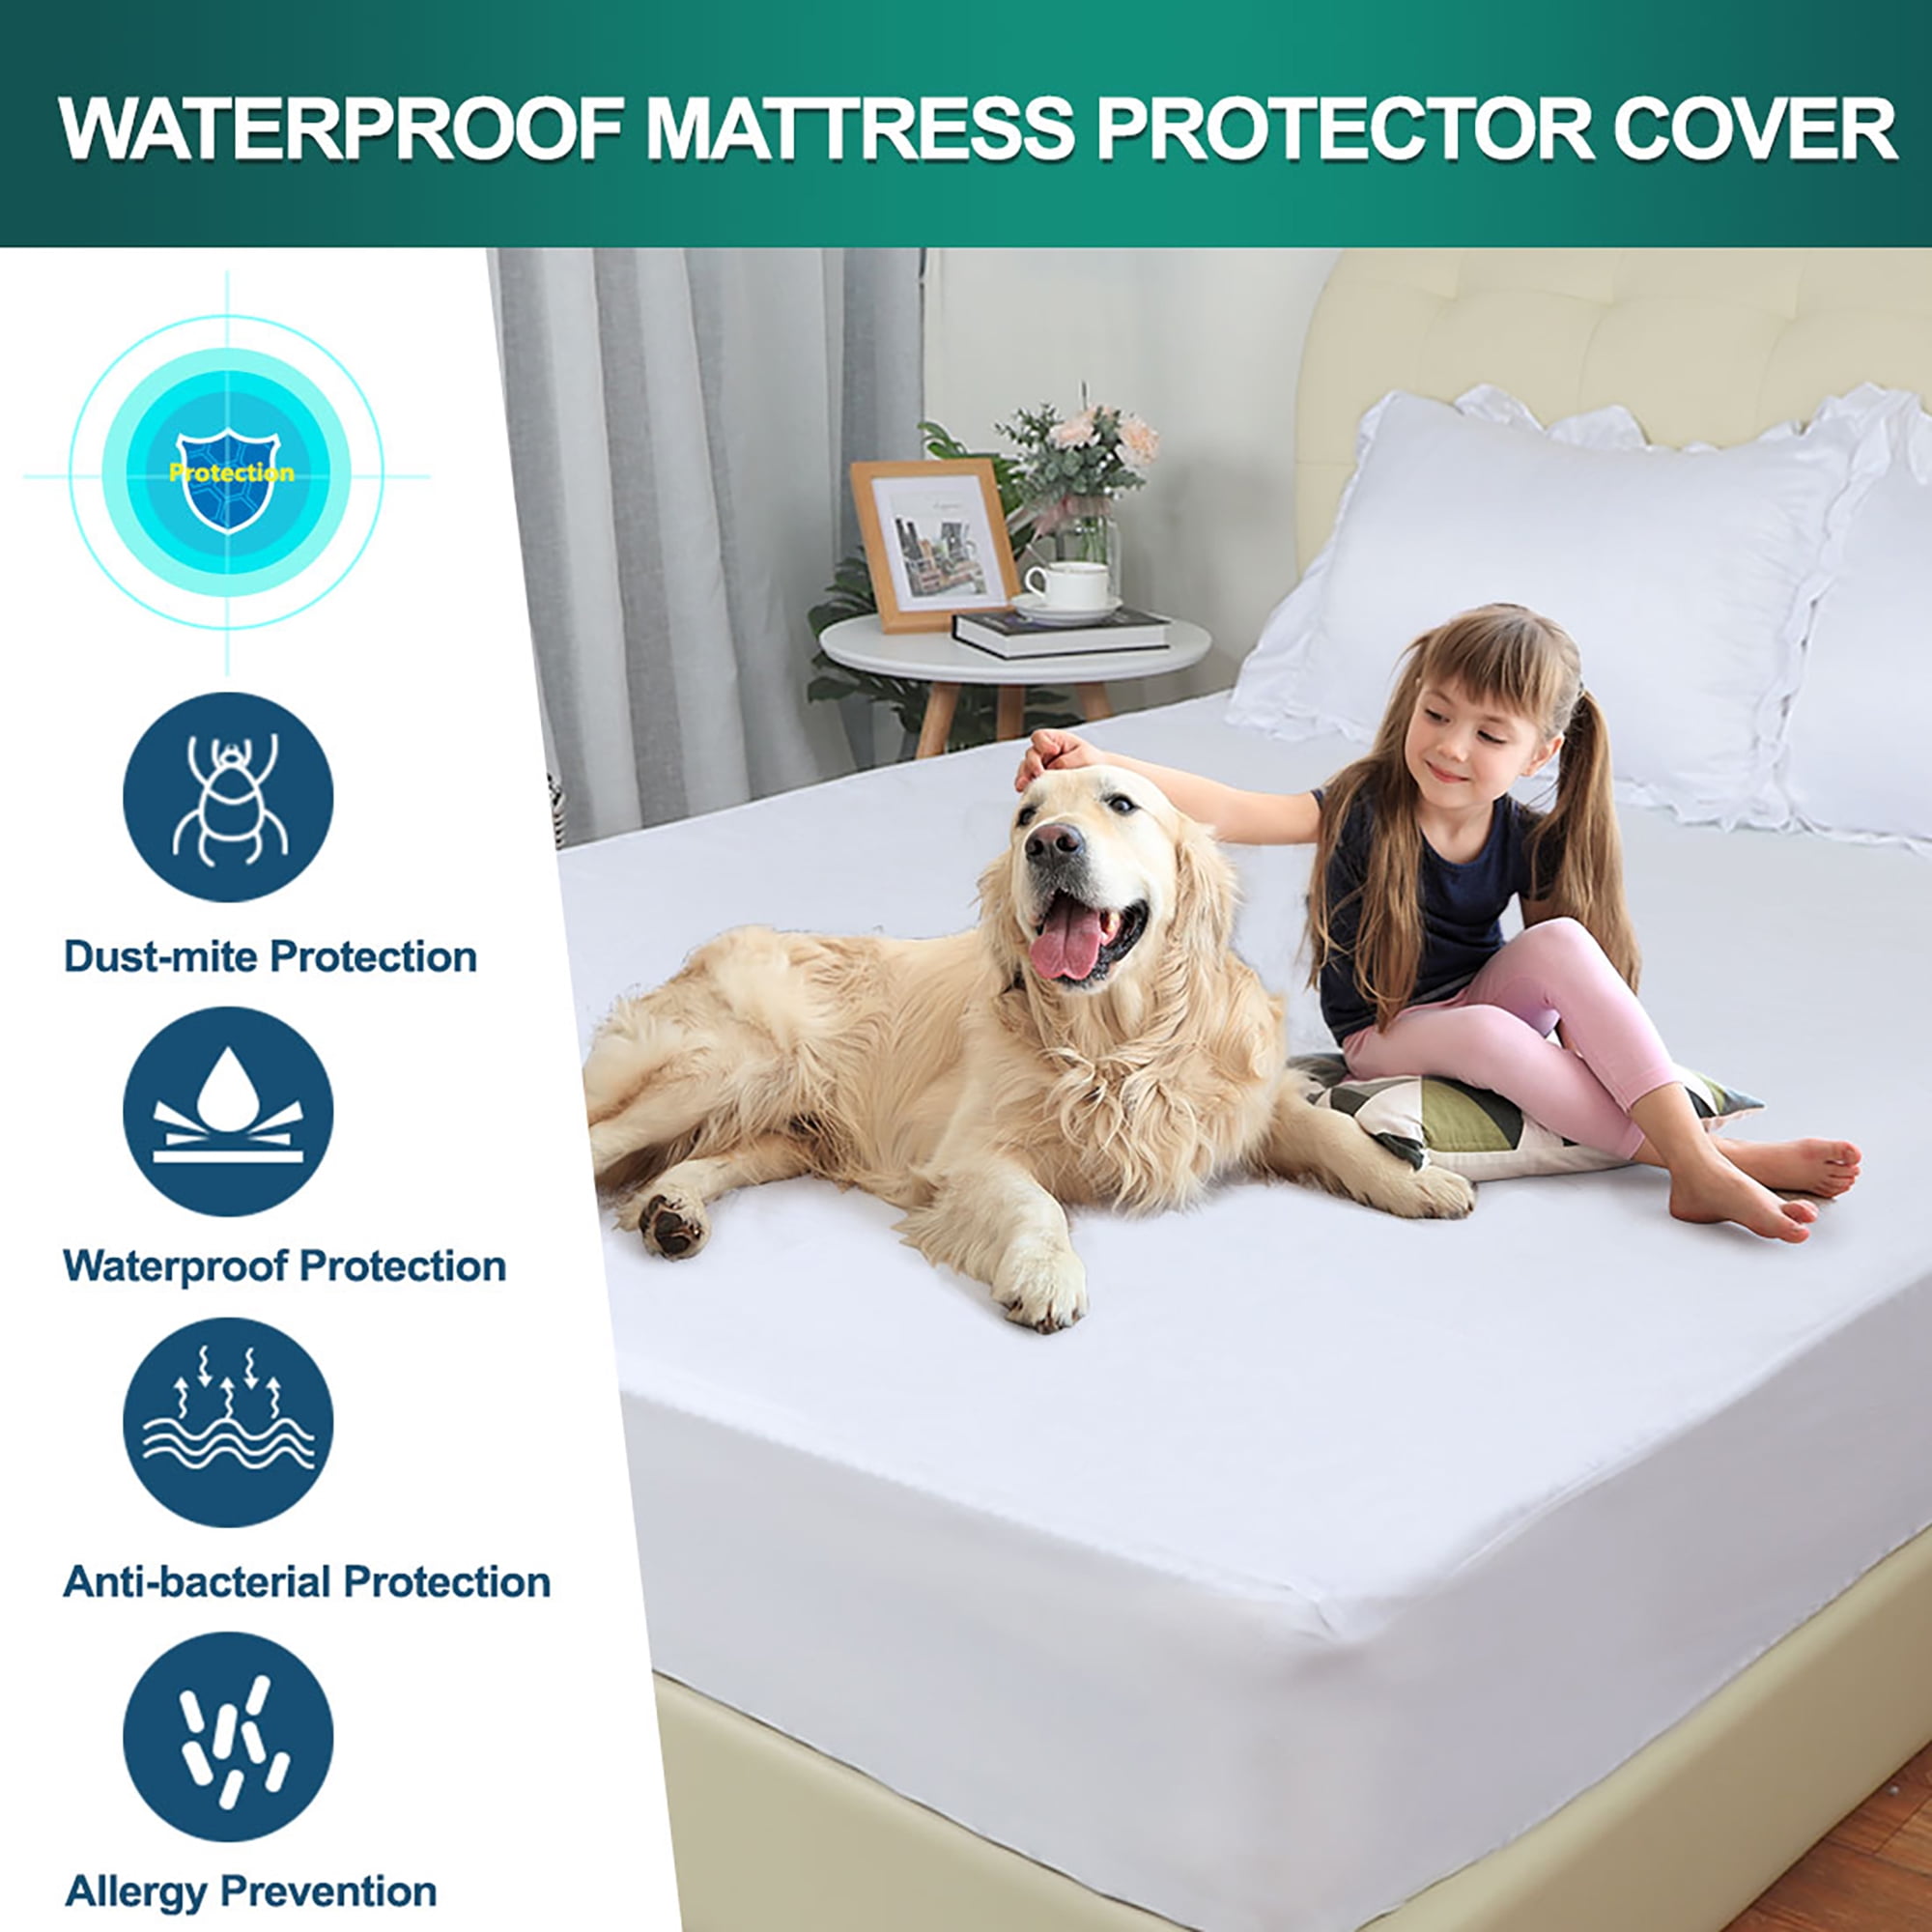 Bacteria Resistant Better Than Pads Mellanni Premium Waterproof Crib Mattress Protector Fitted Deep Pocket Crib/Toddler Bed Covers or Toppers Hypoallergenic Dust Mite 